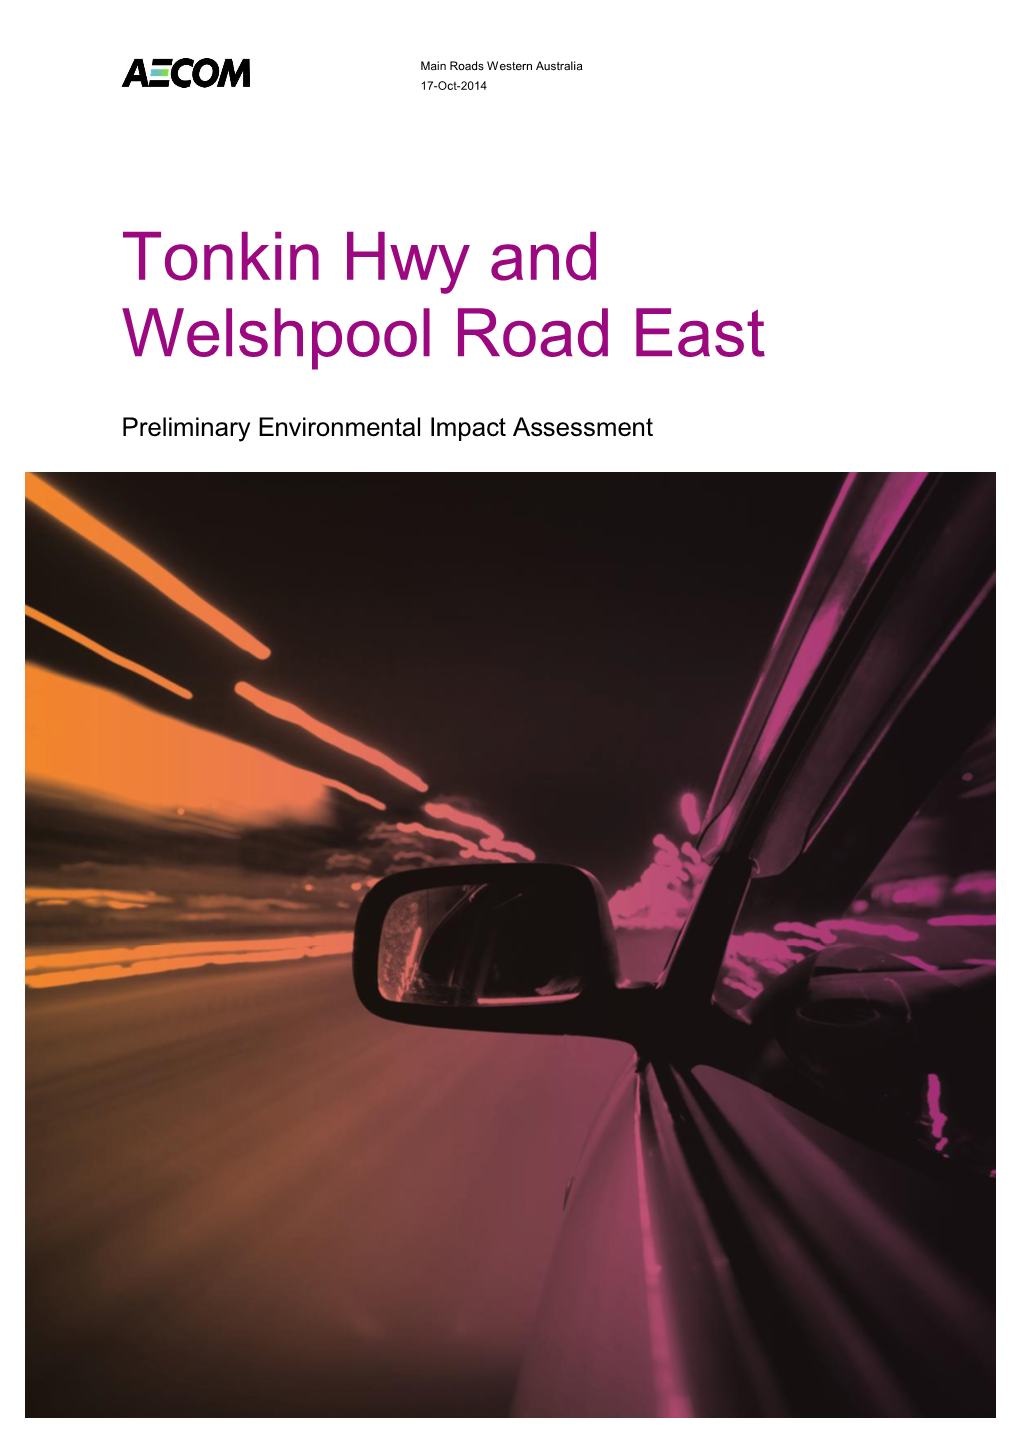 Tonkin Highway and Welshpool Road Preliminary Environmental Impact